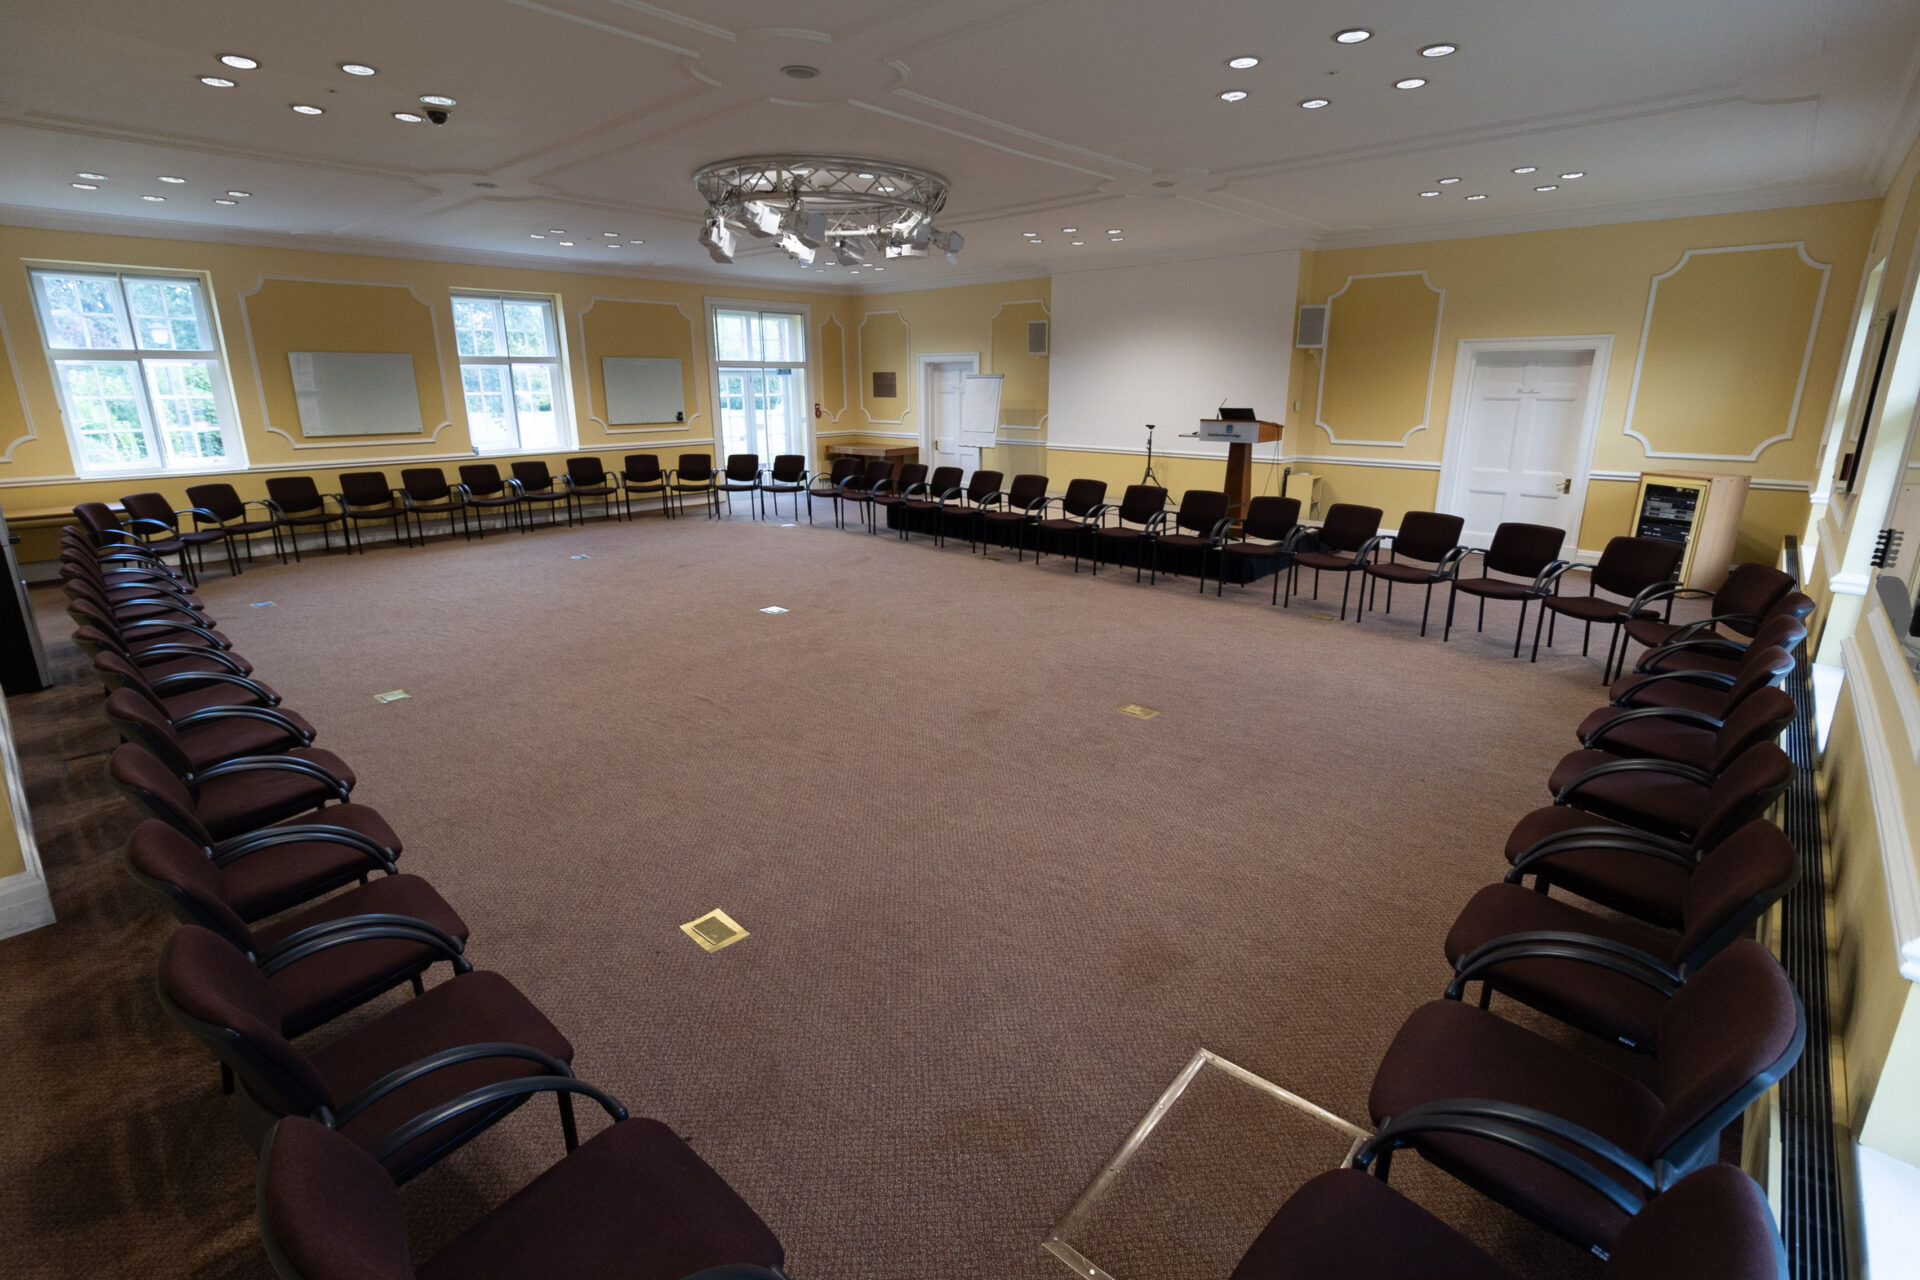 The Flitcroft conference room, set up to accommodate 50 people in a circle.